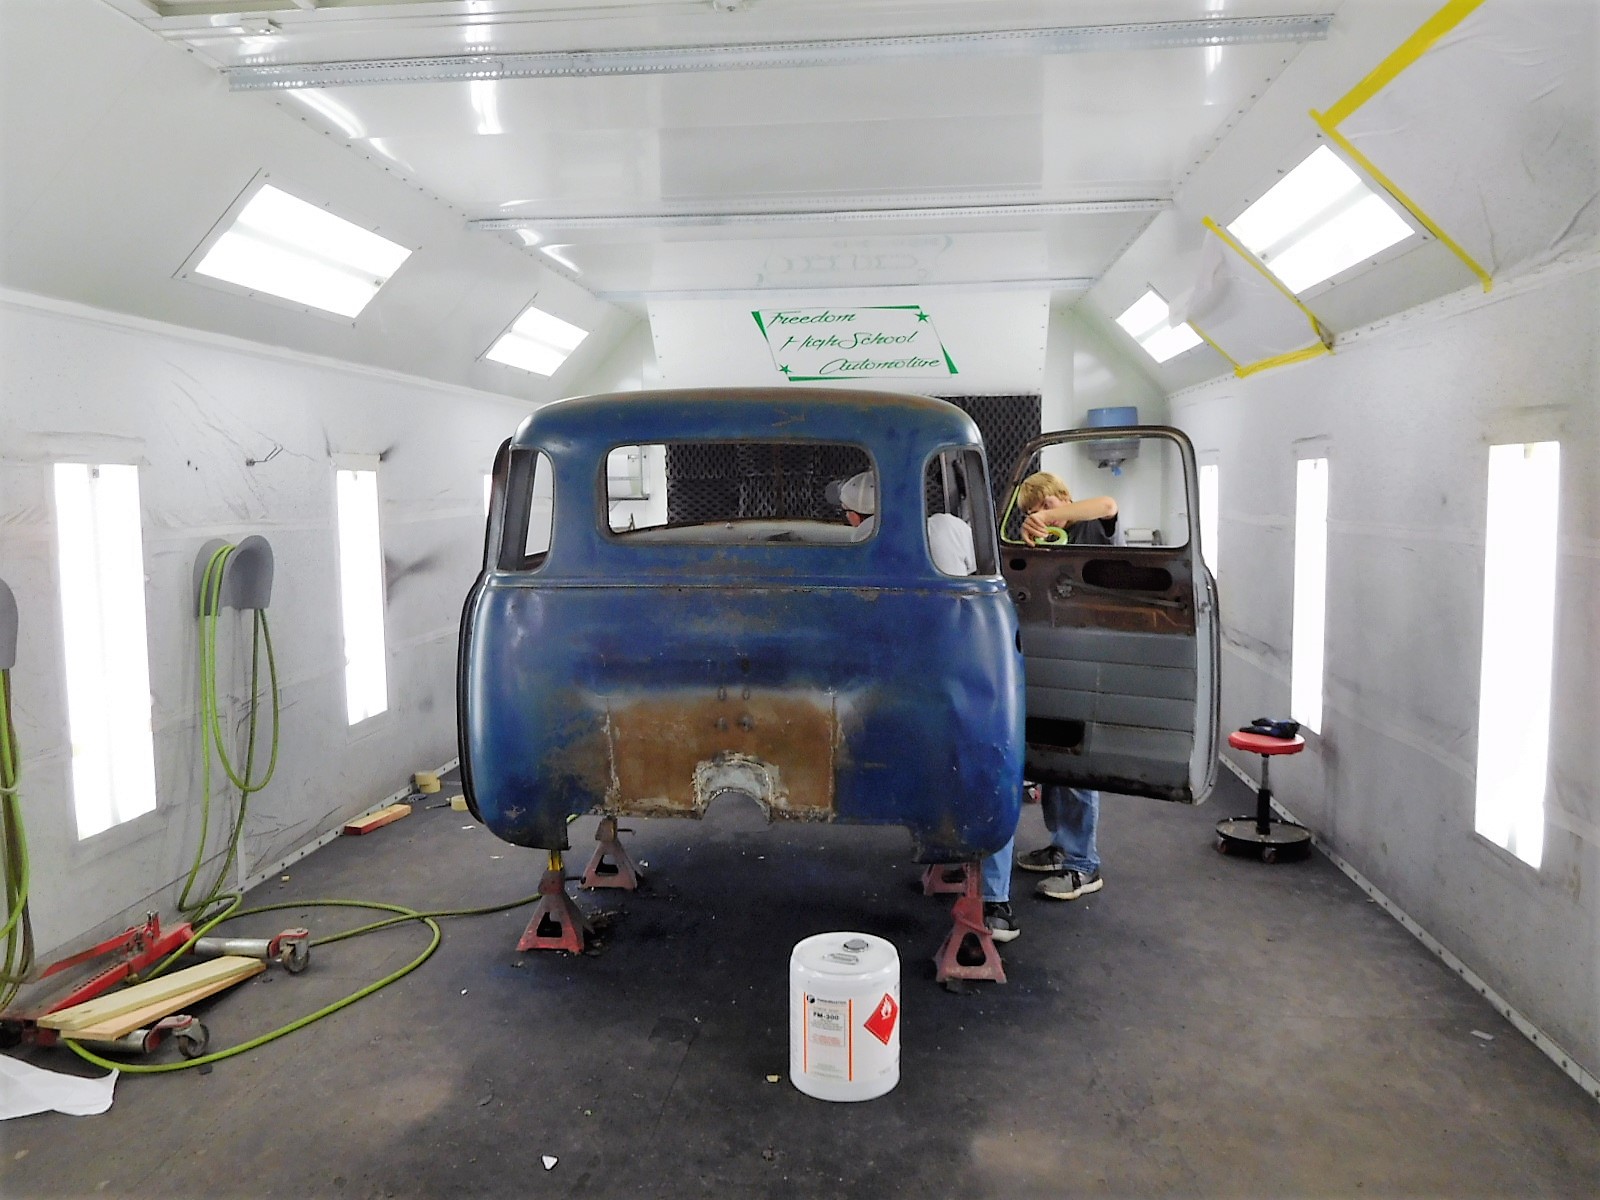 the cab of the truck had been moved into the schoolâ€™s high-tech paint booth.